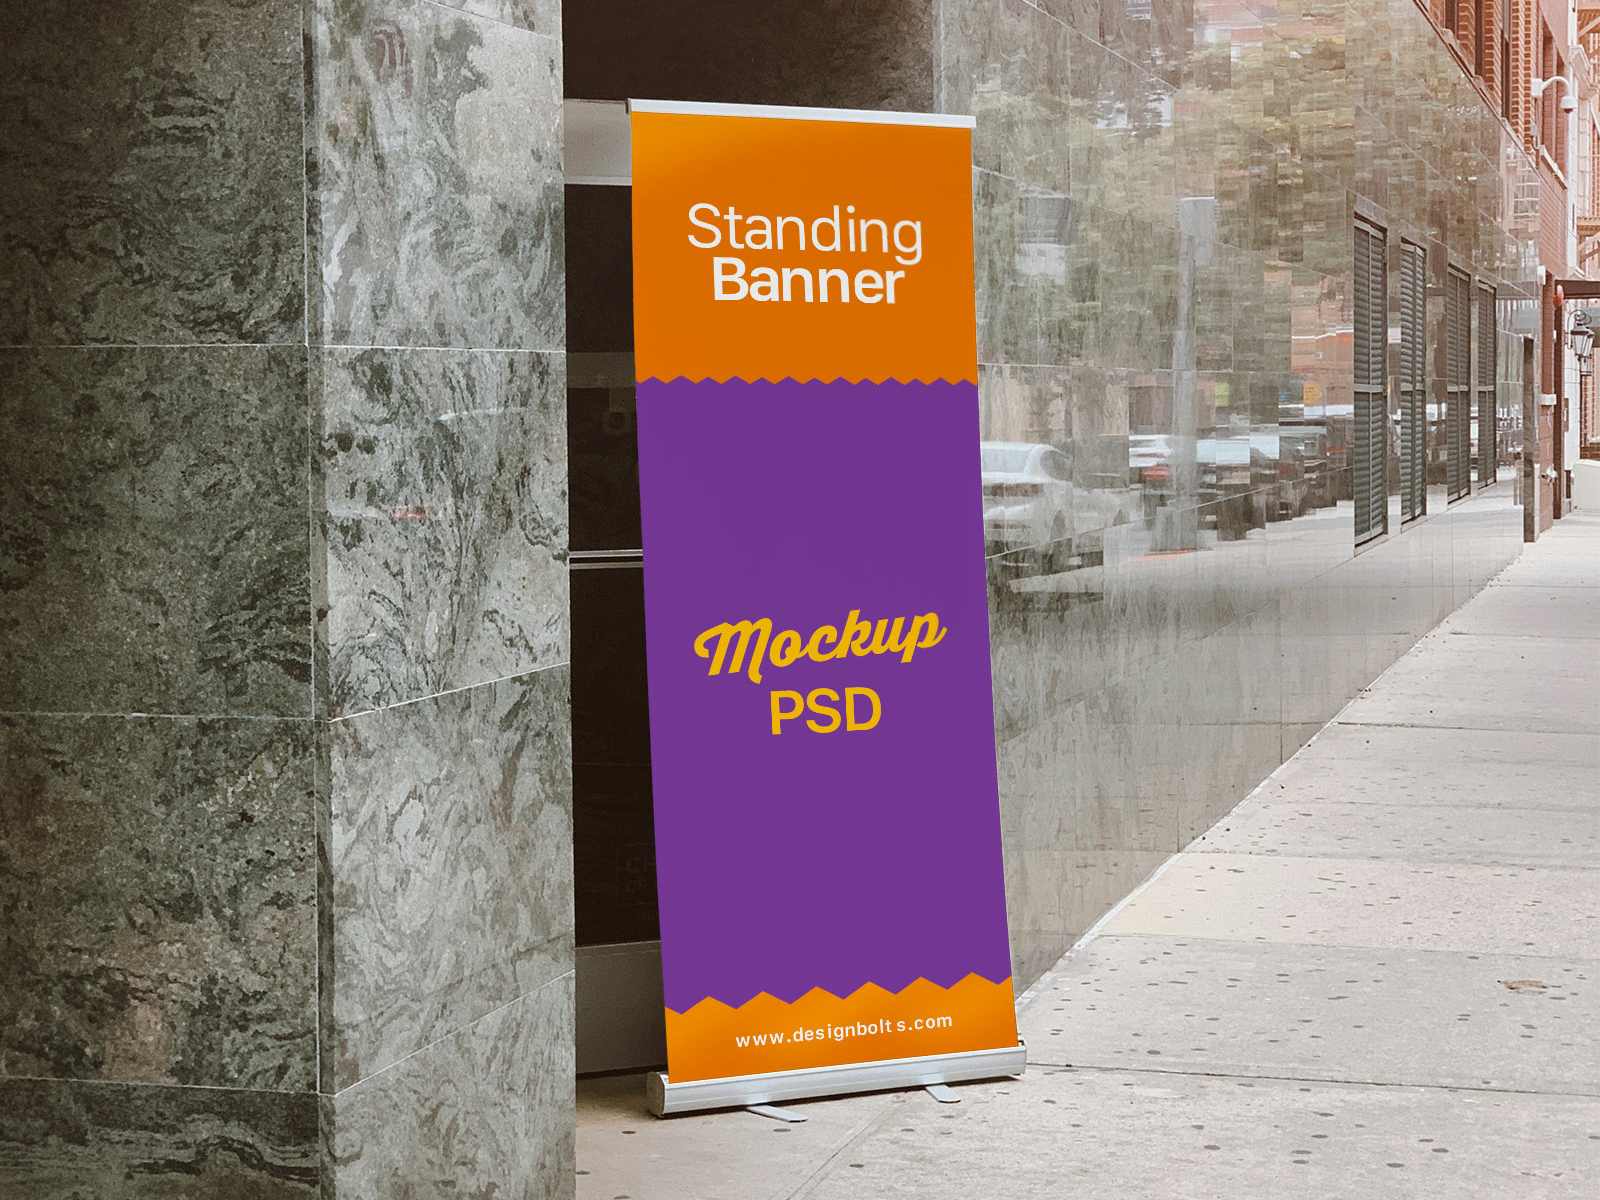 Download Free Outdoor Advertising Standing Banner on Road Mockup PSD by Zee Que | Designbolts on Dribbble